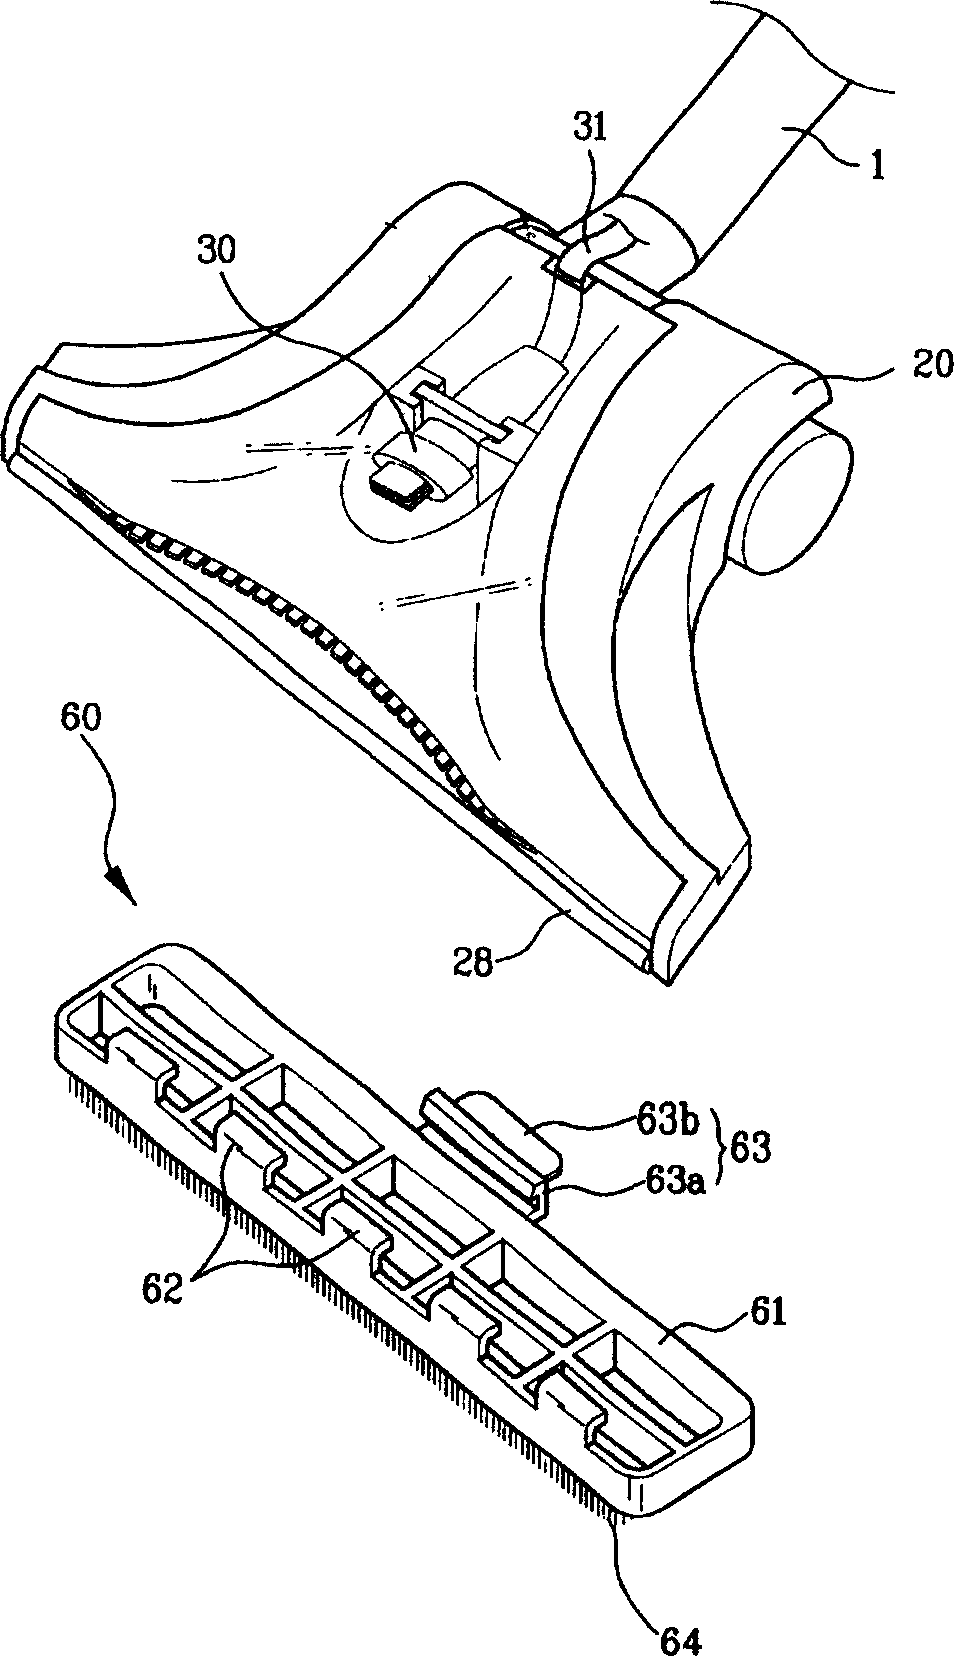 Linkage structure for accessories of vacuum cleaner in use for both dry and wet condition